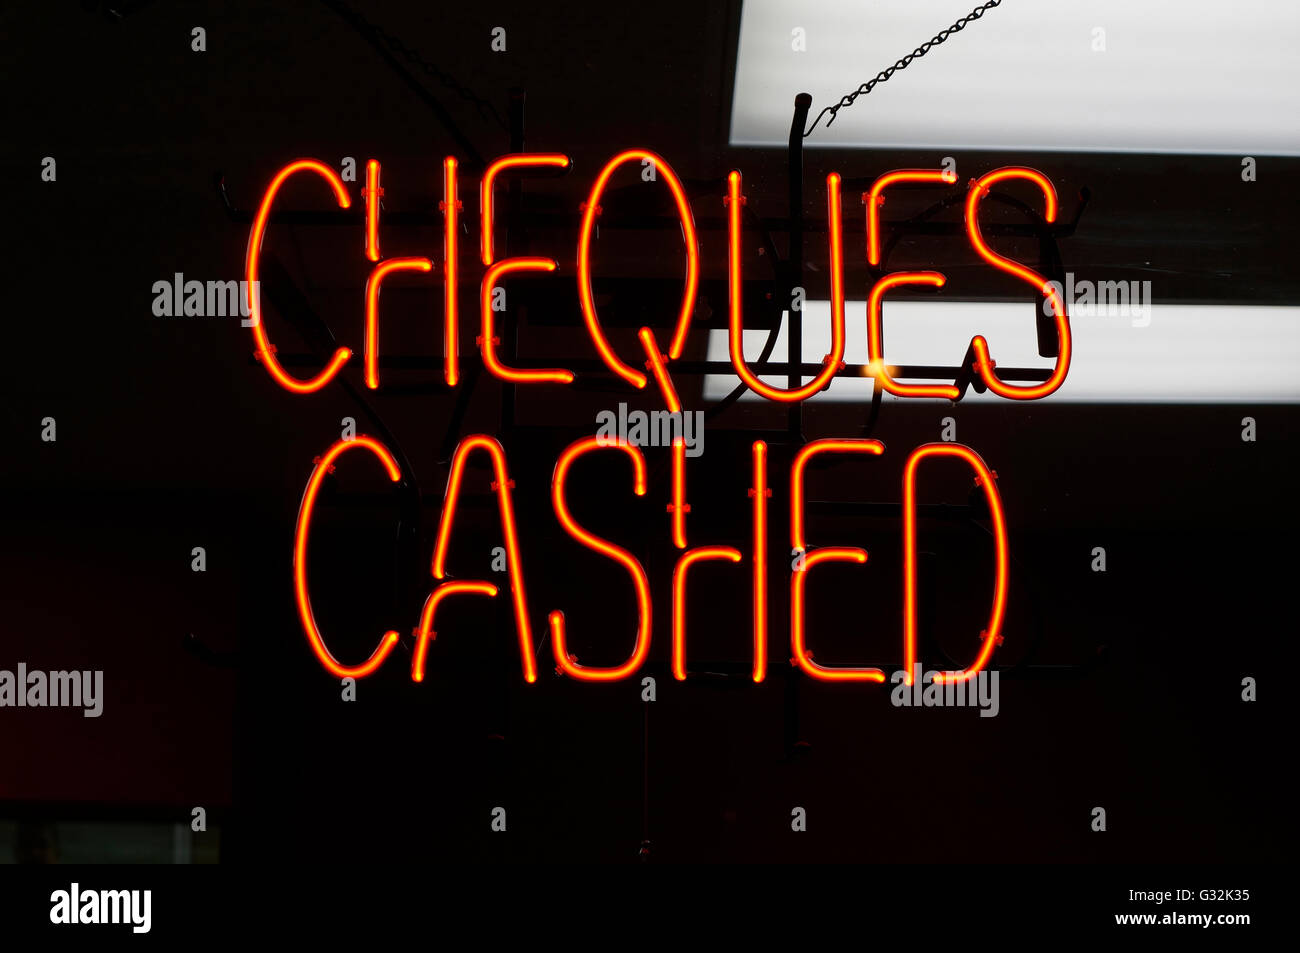 Cheques Cashed digital sign Stock Photo